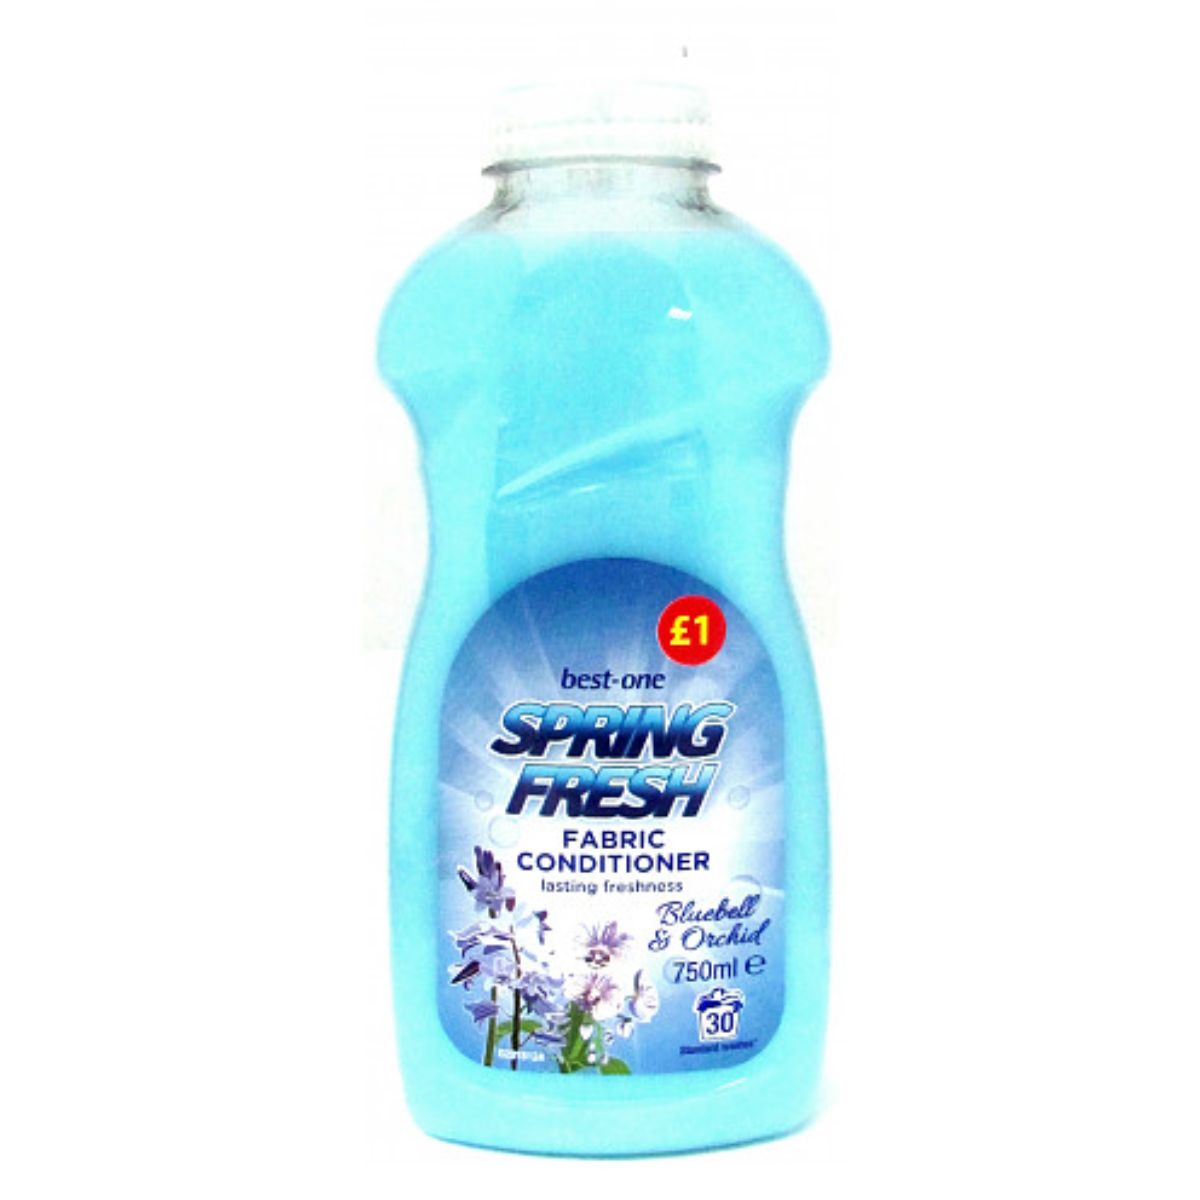 A bottle of Best One - Spring Fresh Bluebell and Orchid Fabric Conditioner - 750ml.